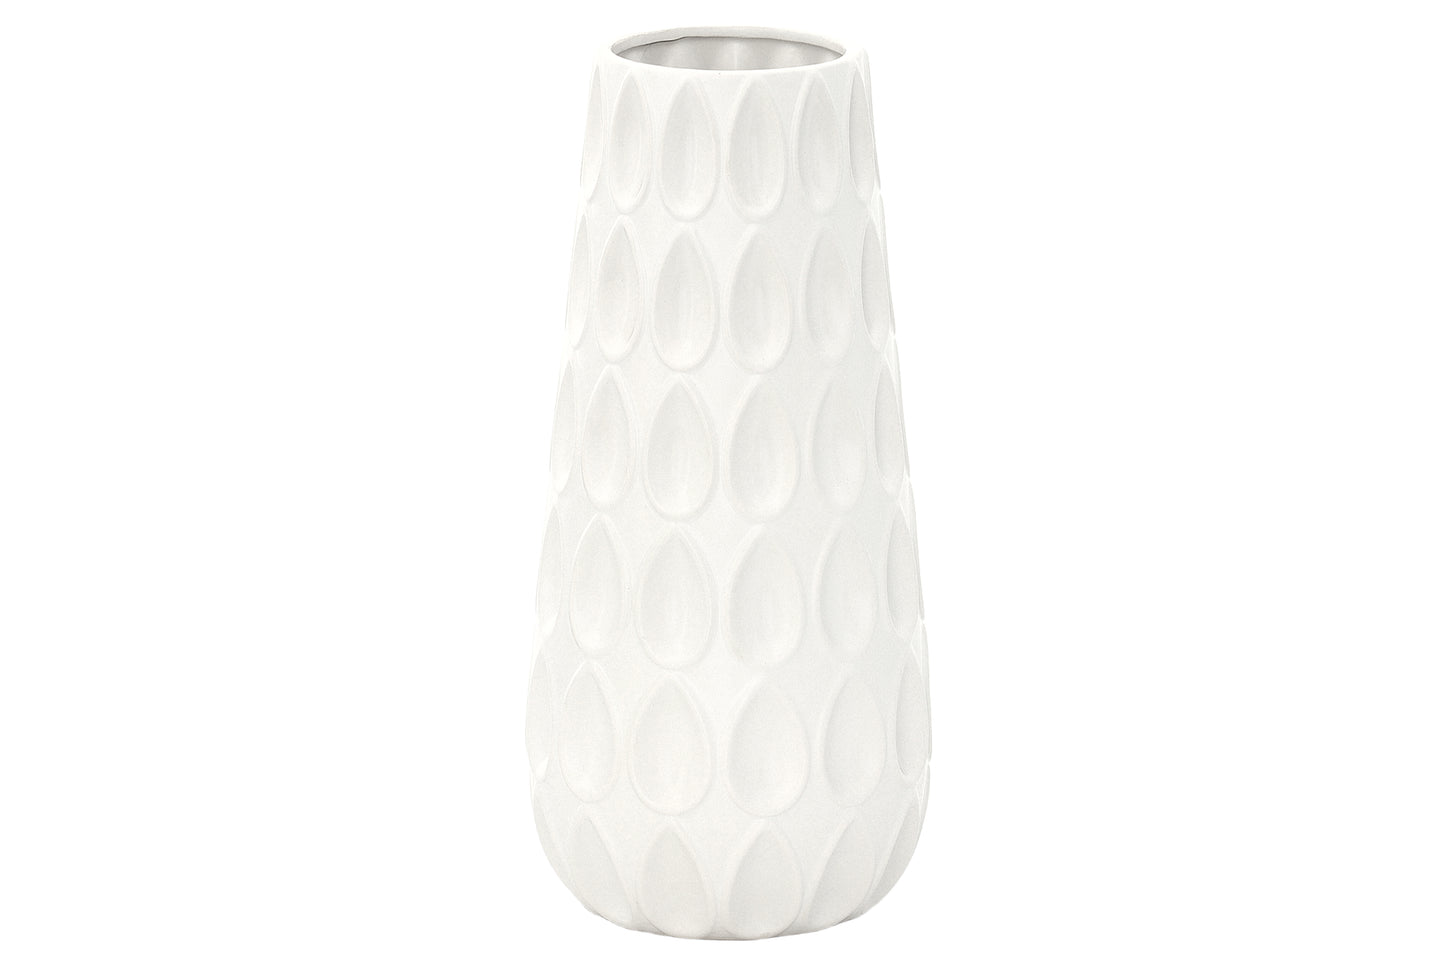 Ceramic Round Vase with Debossed Water Drops Pattern and Flared Bottom Design Body Matte Finish White